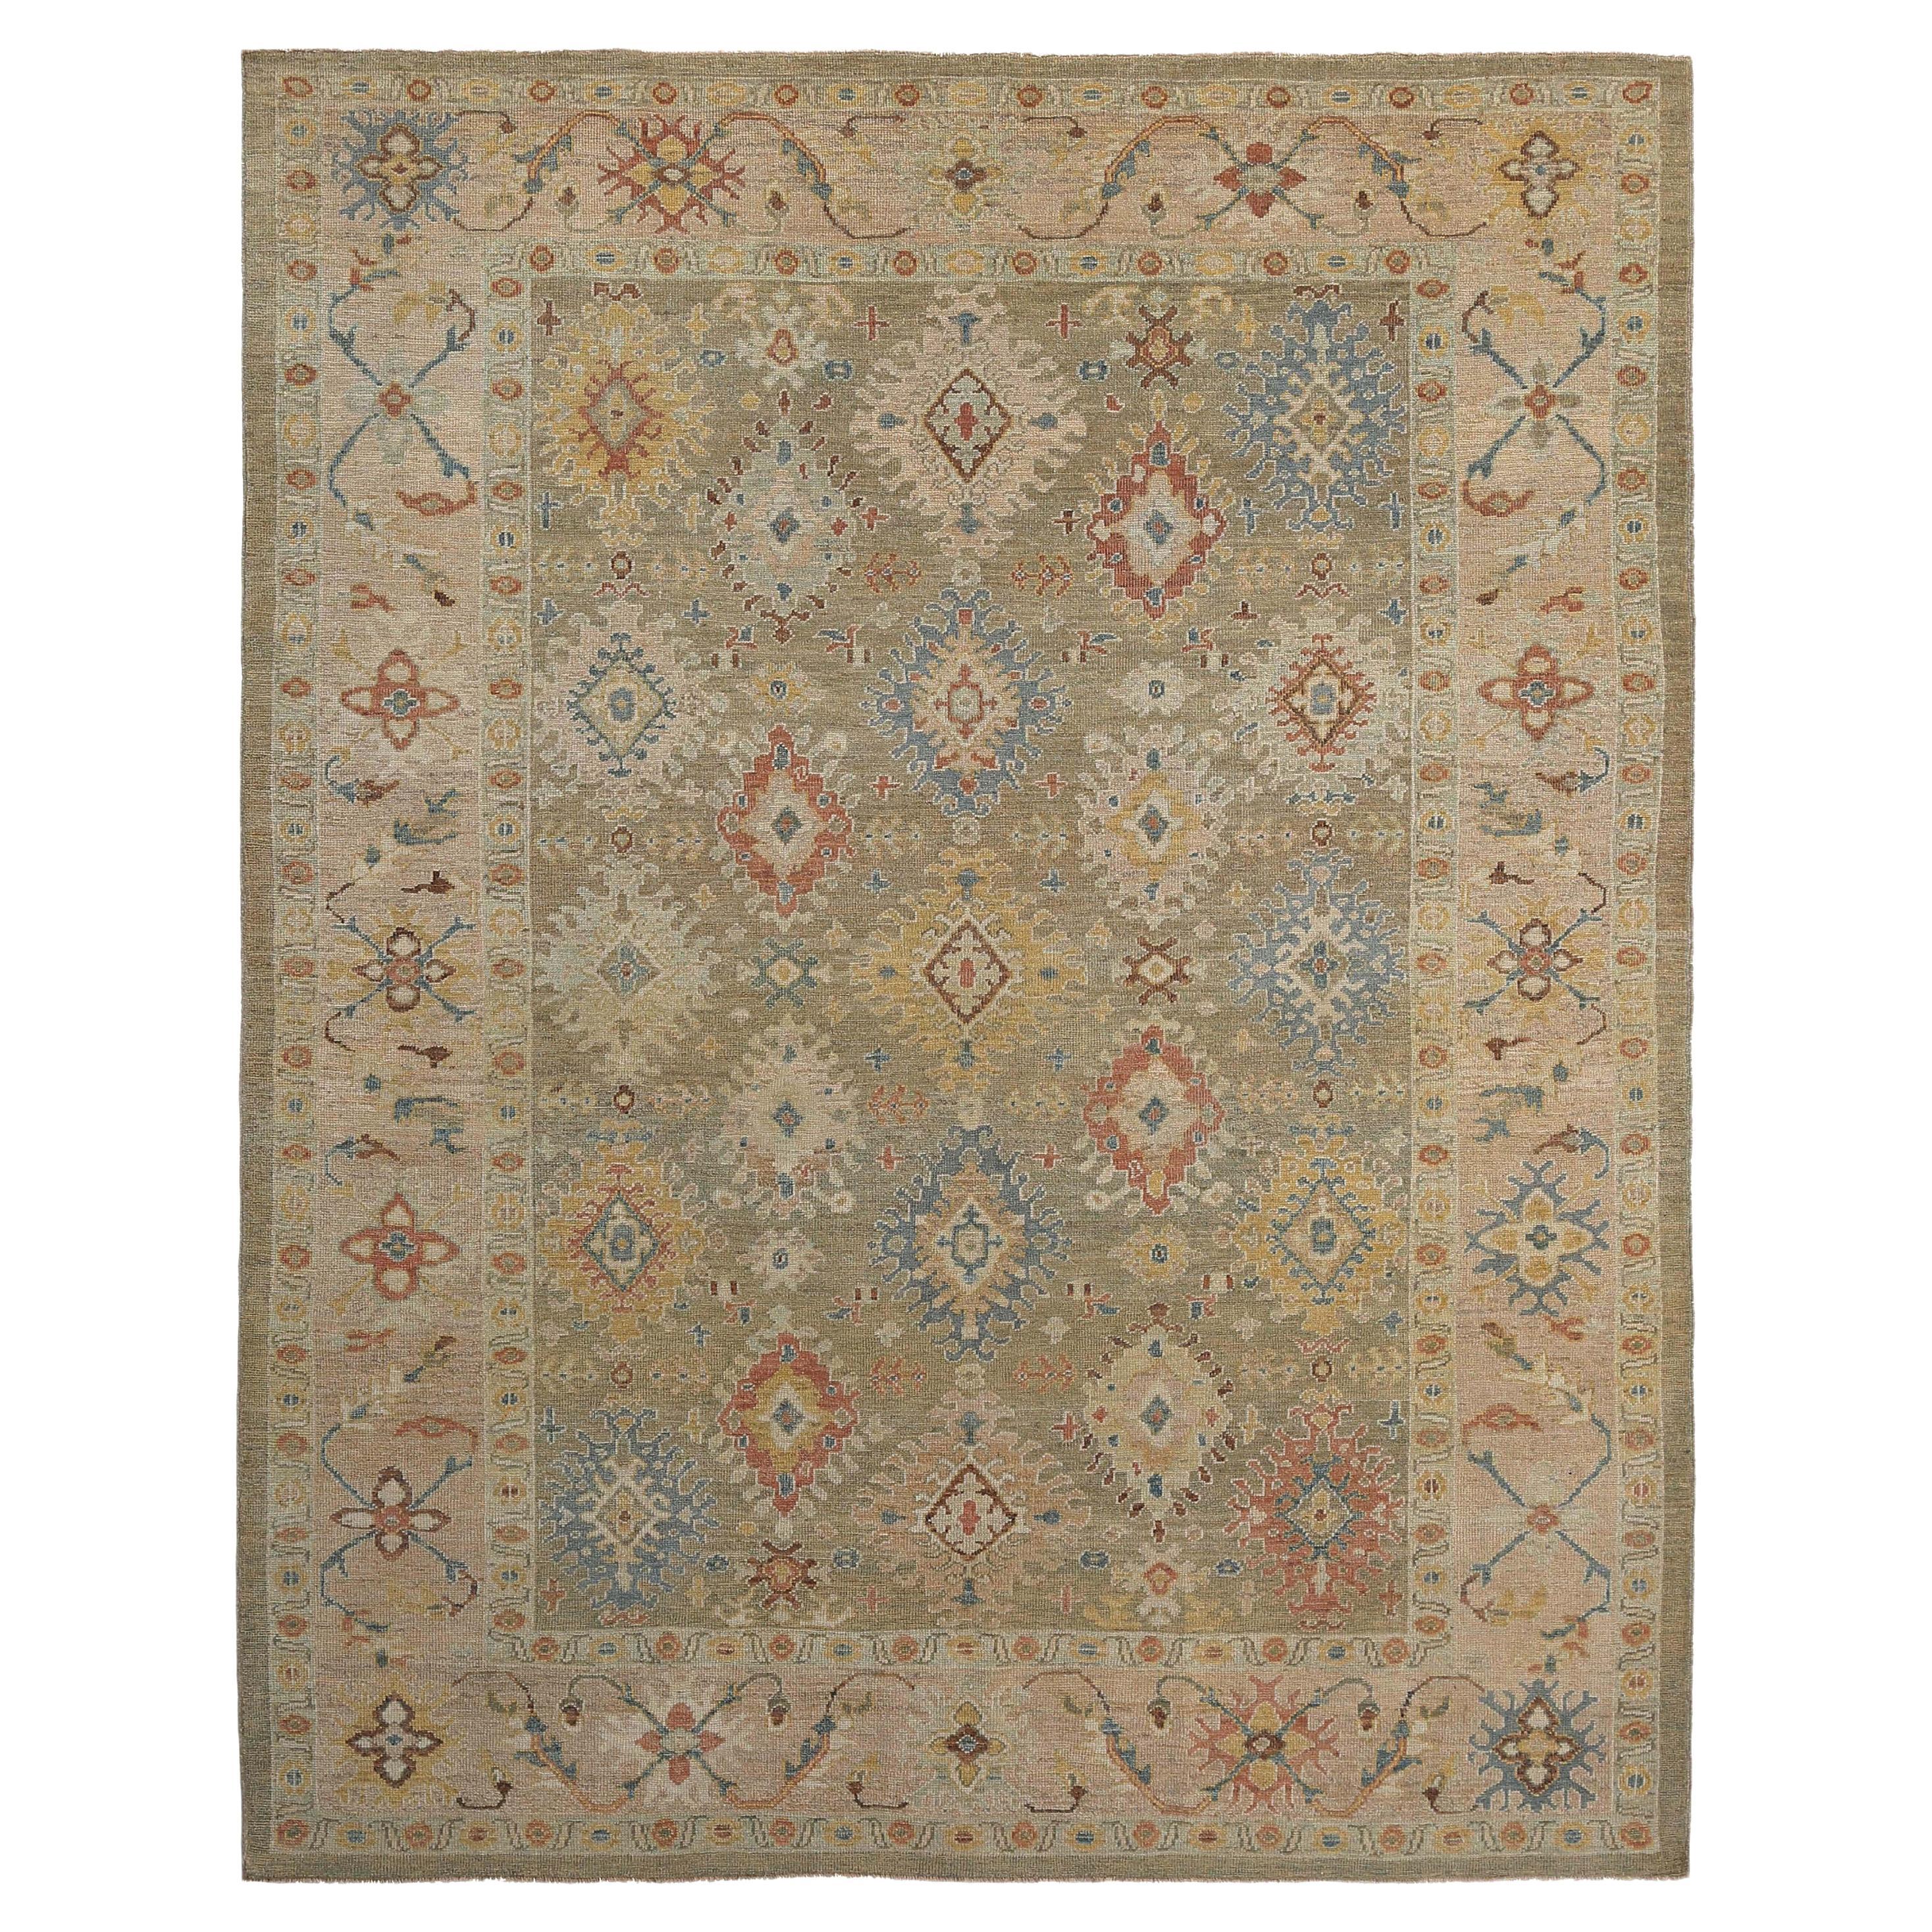 Patterned Neutral Sultanabad Rug For Sale